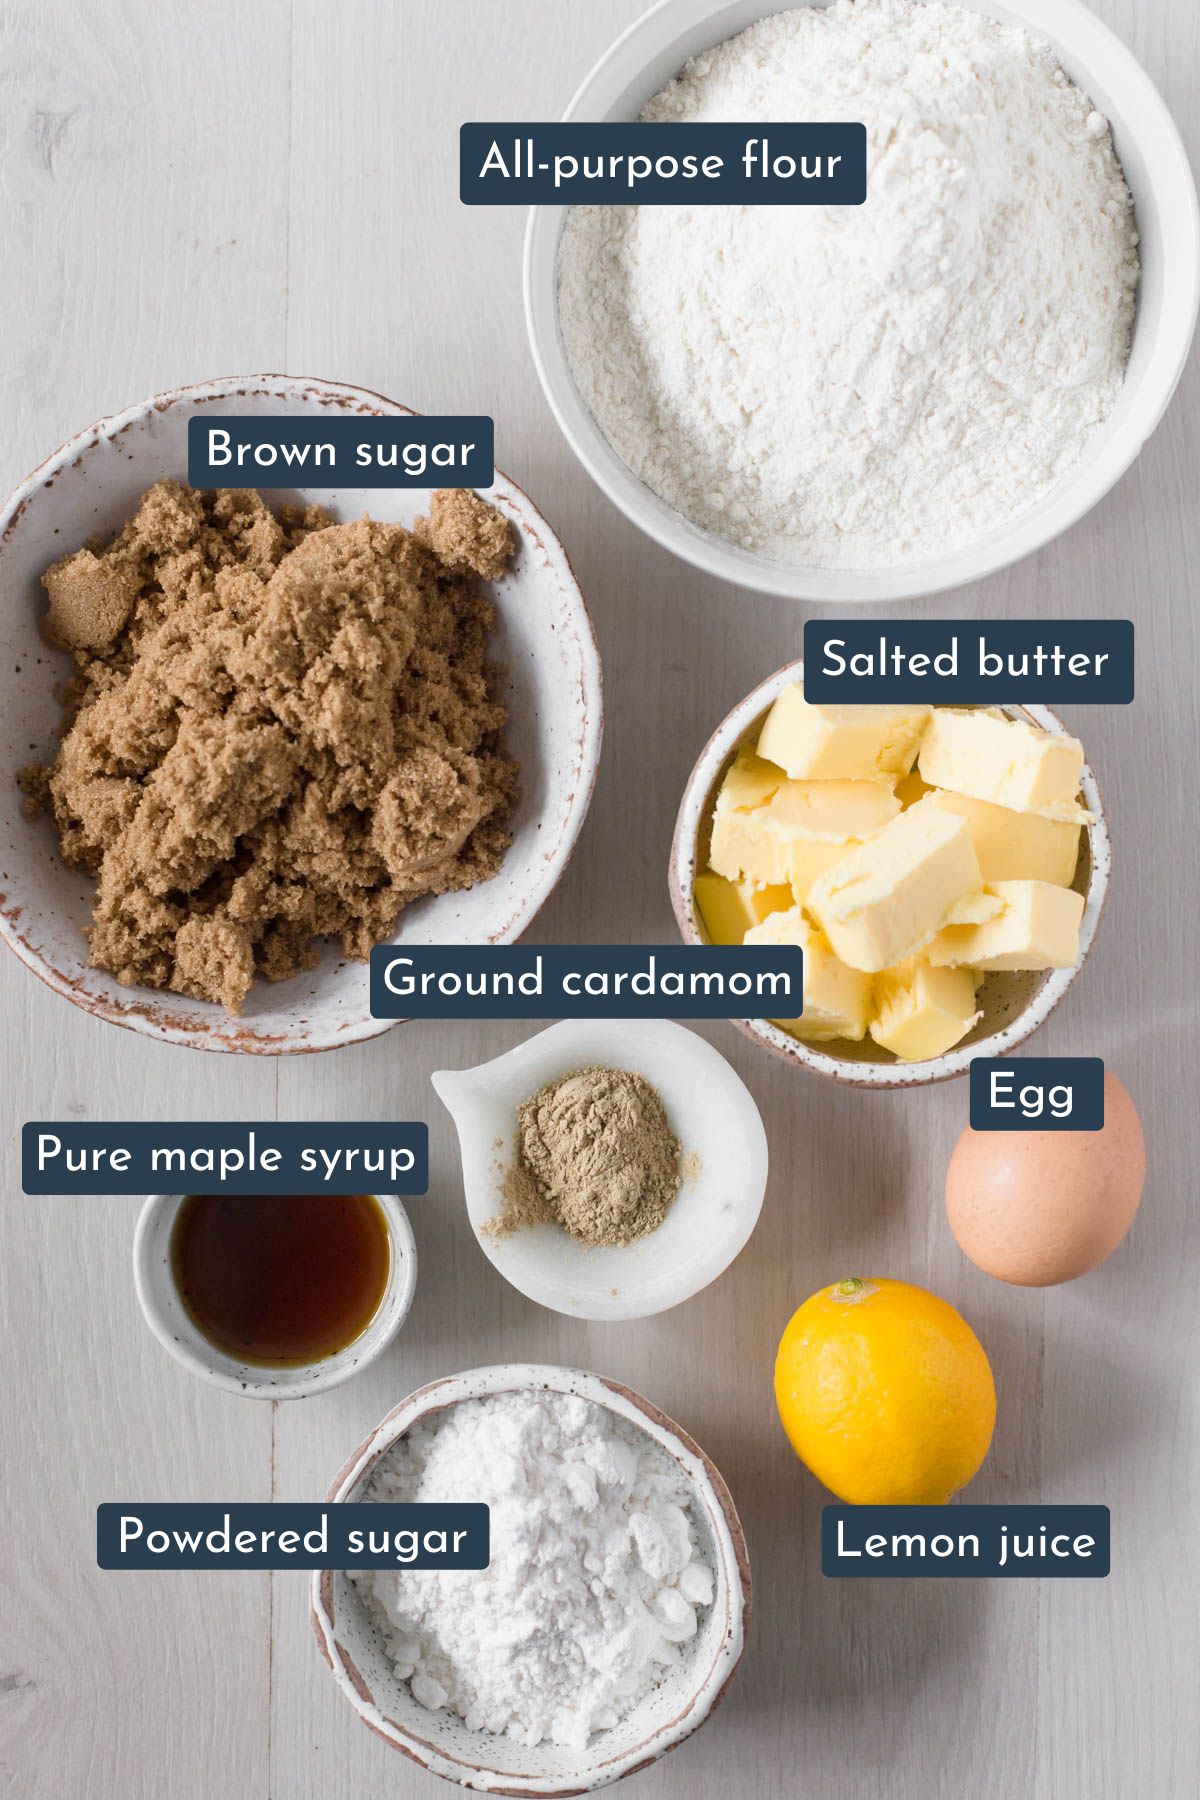 Ingredients to make cardamom cookies is all-purpose flour, brown sugar, ground cardamom, egg, salted butter, maple syrup, powdered sugar and lemon juice.